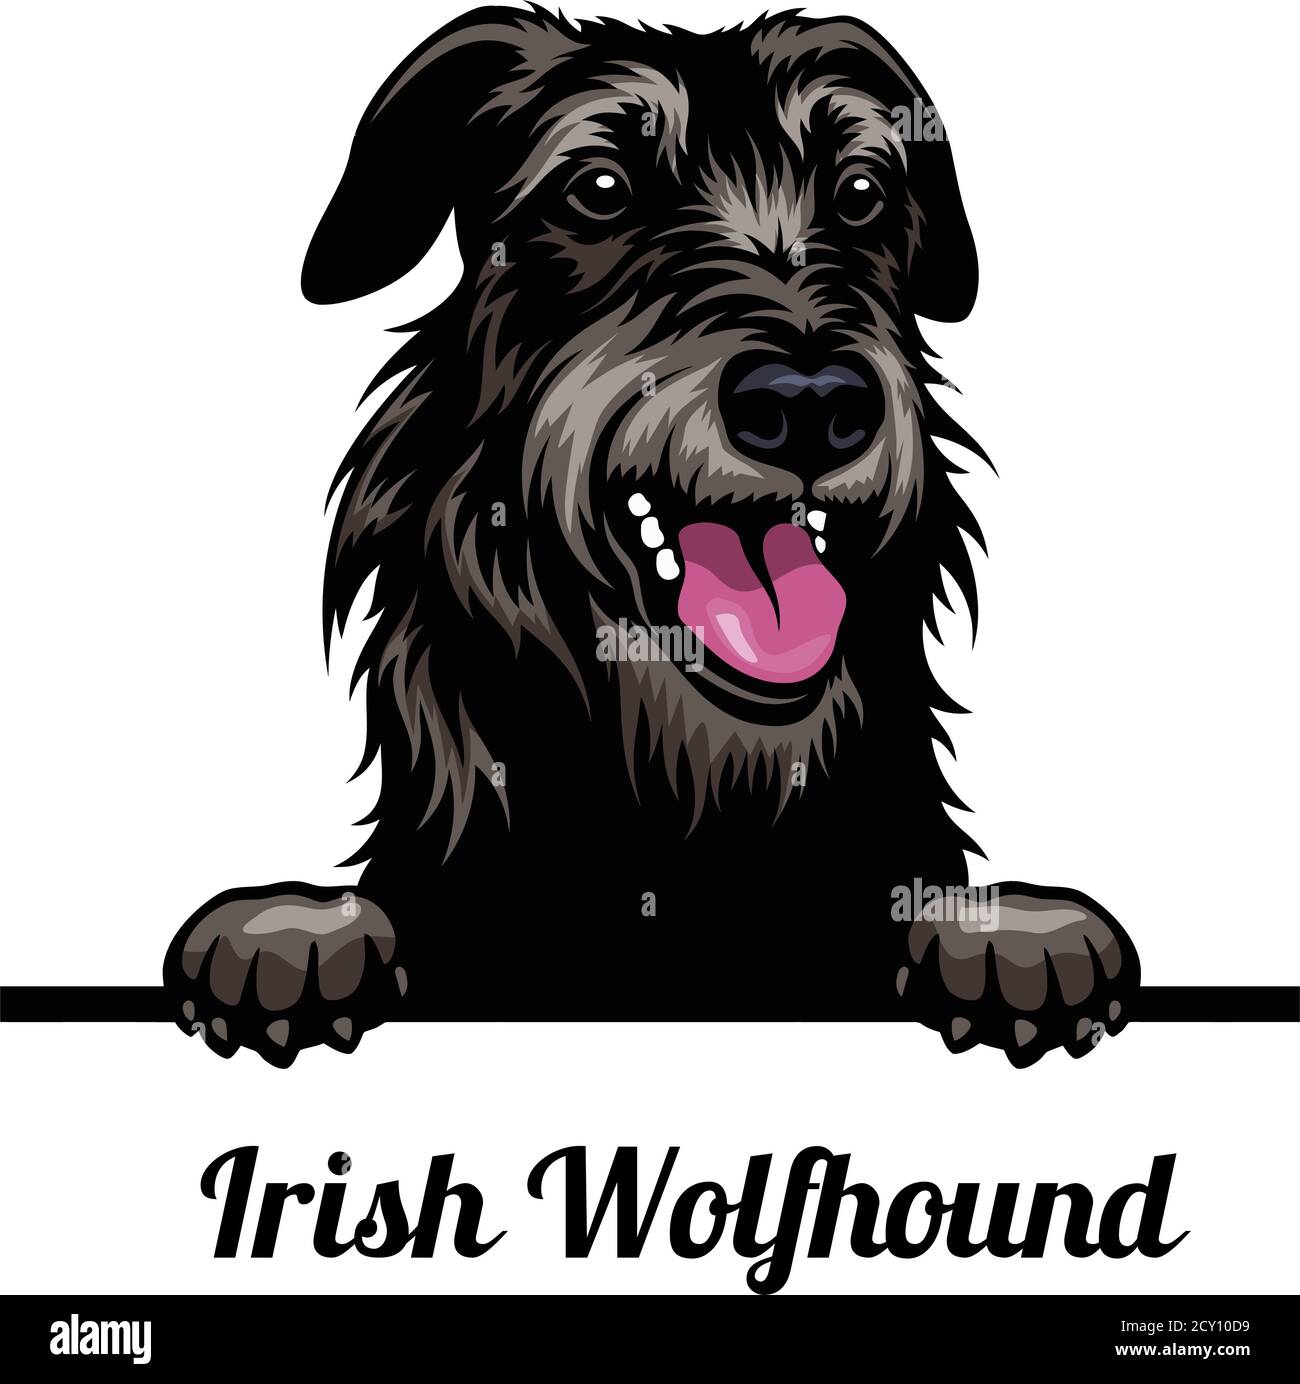 Head Irish Wolfhound - dog breed. Color image of a dogs head isolated on a white background Stock Vector